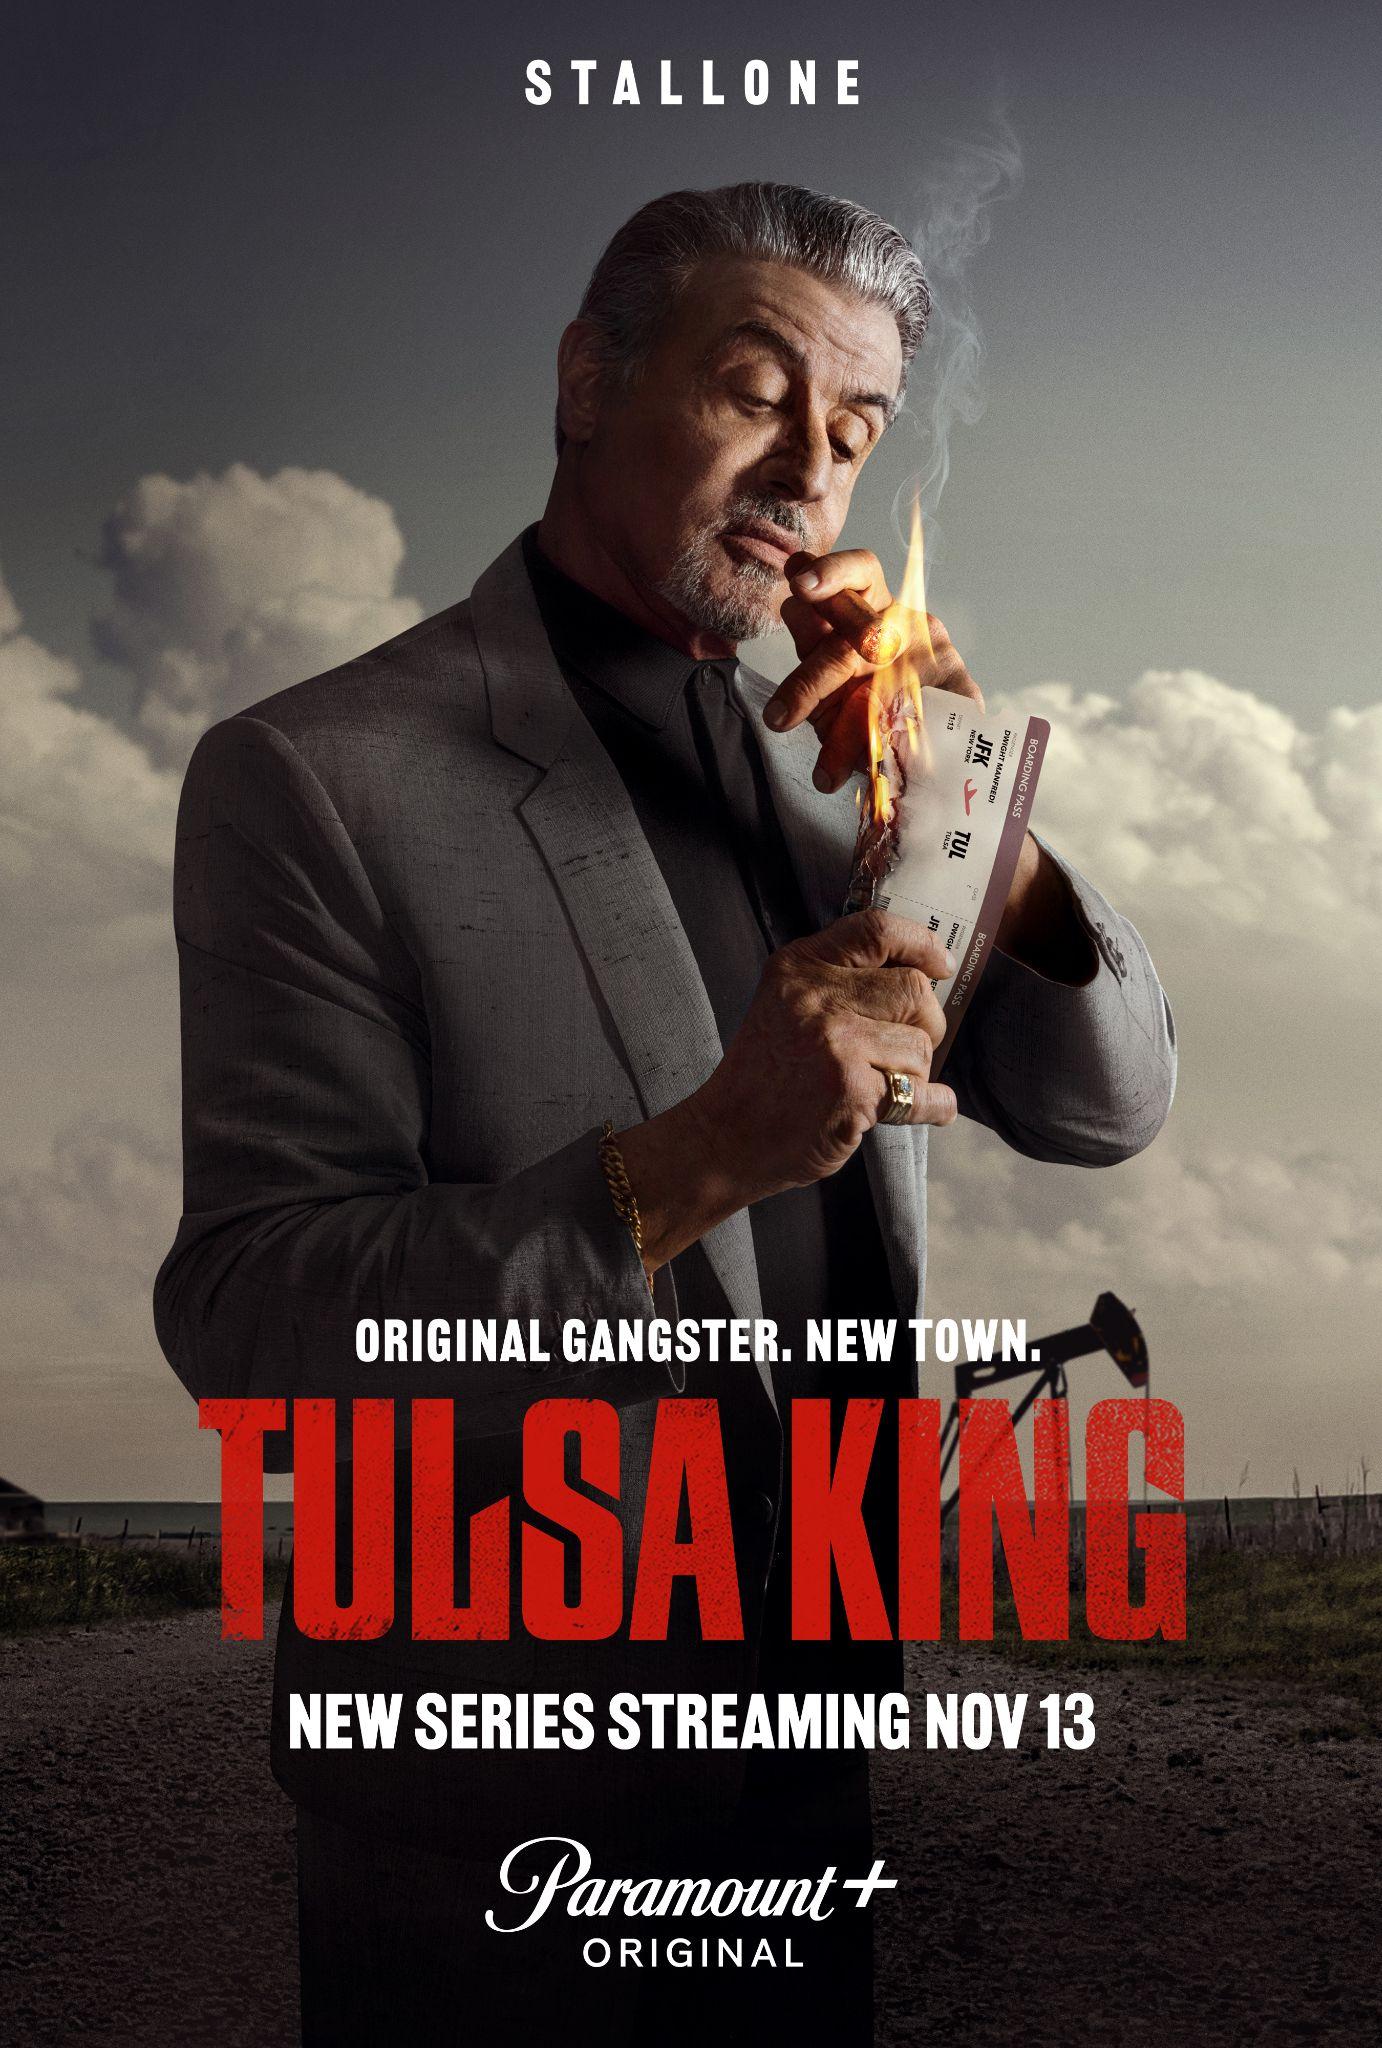 Paramount Press Express PARAMOUNT+ DEBUTS THE OFFICIAL TRAILER AND KEY ART FOR NEW ORIGINAL SERIES “TULSA KING,” STARRING ACADEMY AWARD® NOMINEE SYLVESTER STALLONE, DURING “NFL ON CBS”